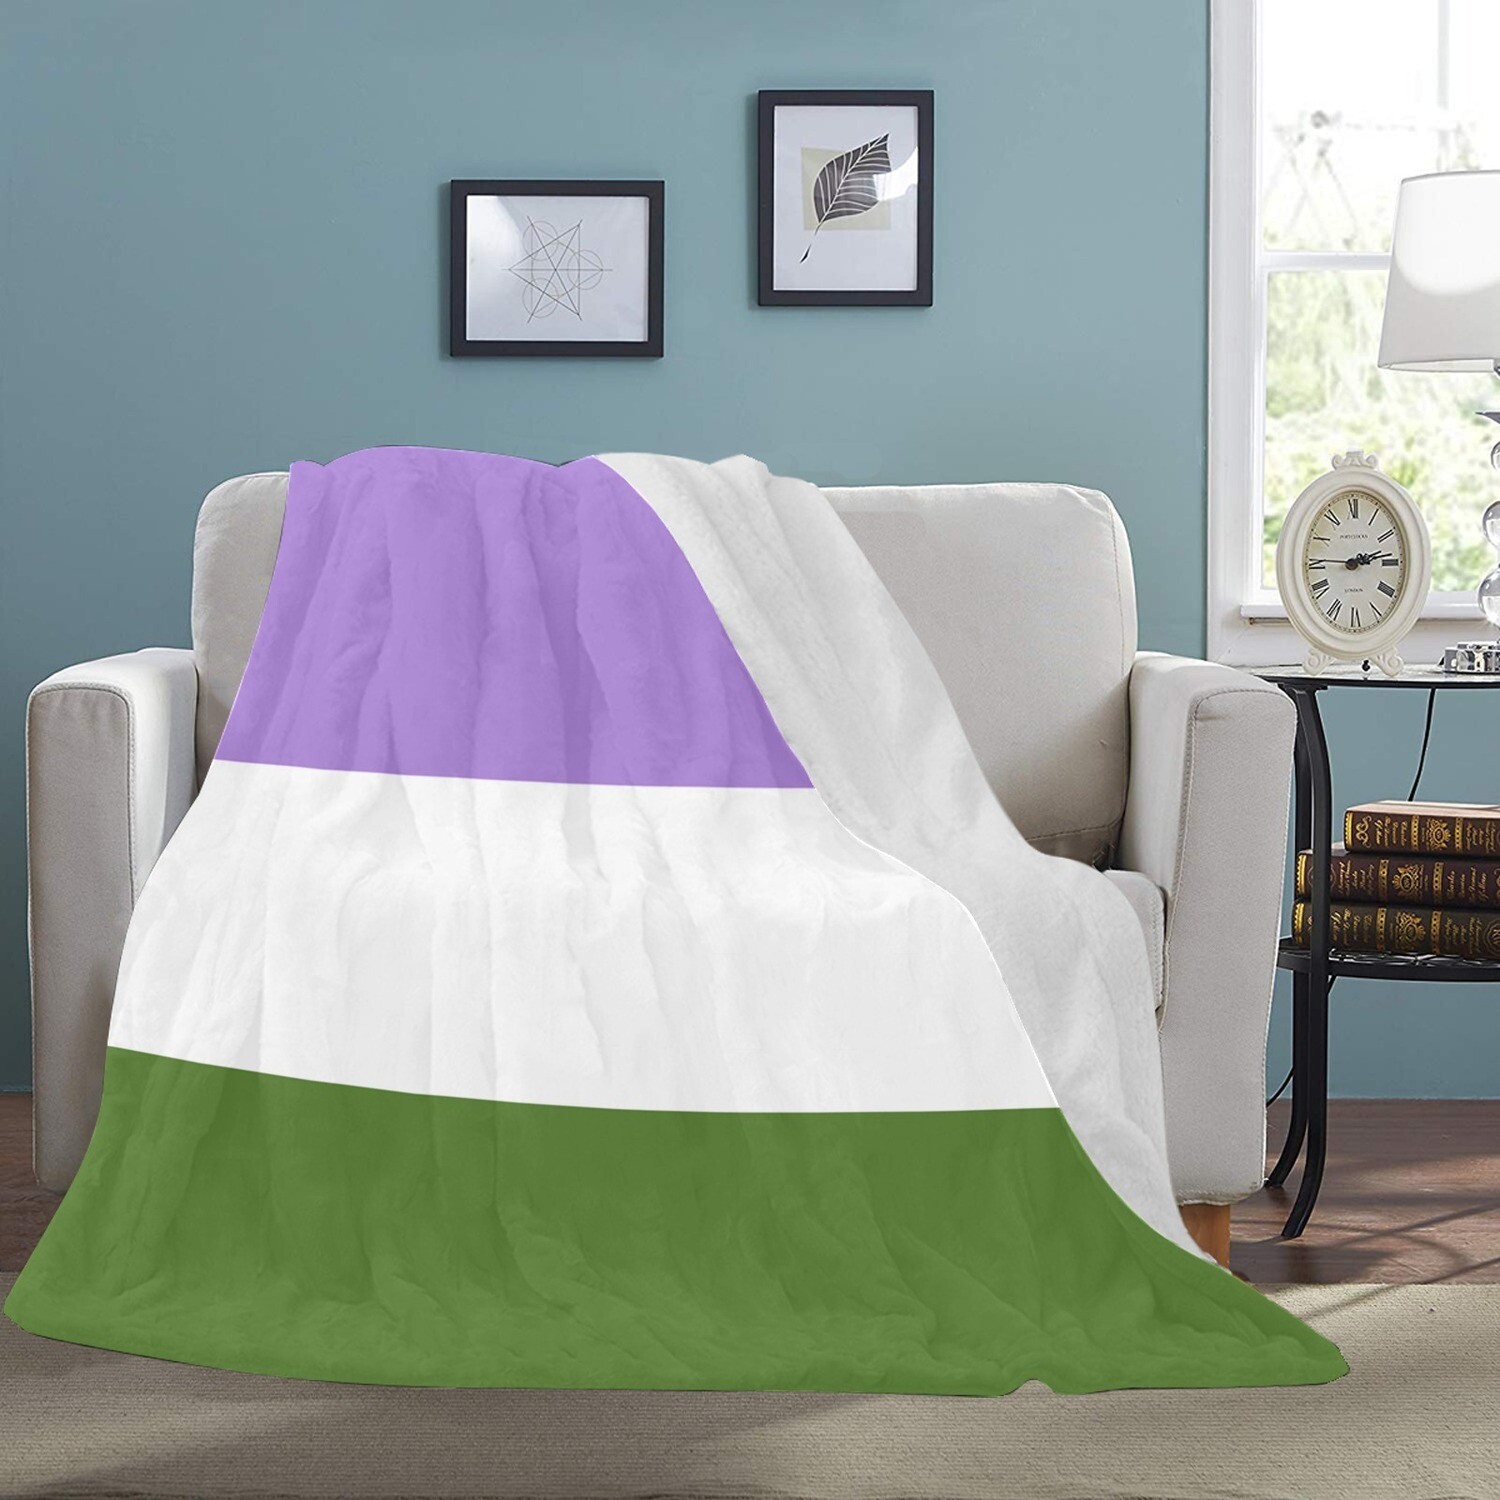 🤴🏽👸🏽🏳️‍🌈 Large Ultra-Soft Micro Fleece Blanket Love is Love Genderqueer Pride Flag by Marilyn Roxie 2011, gift, gift for her, gift for him, gift for them, 70"x80"